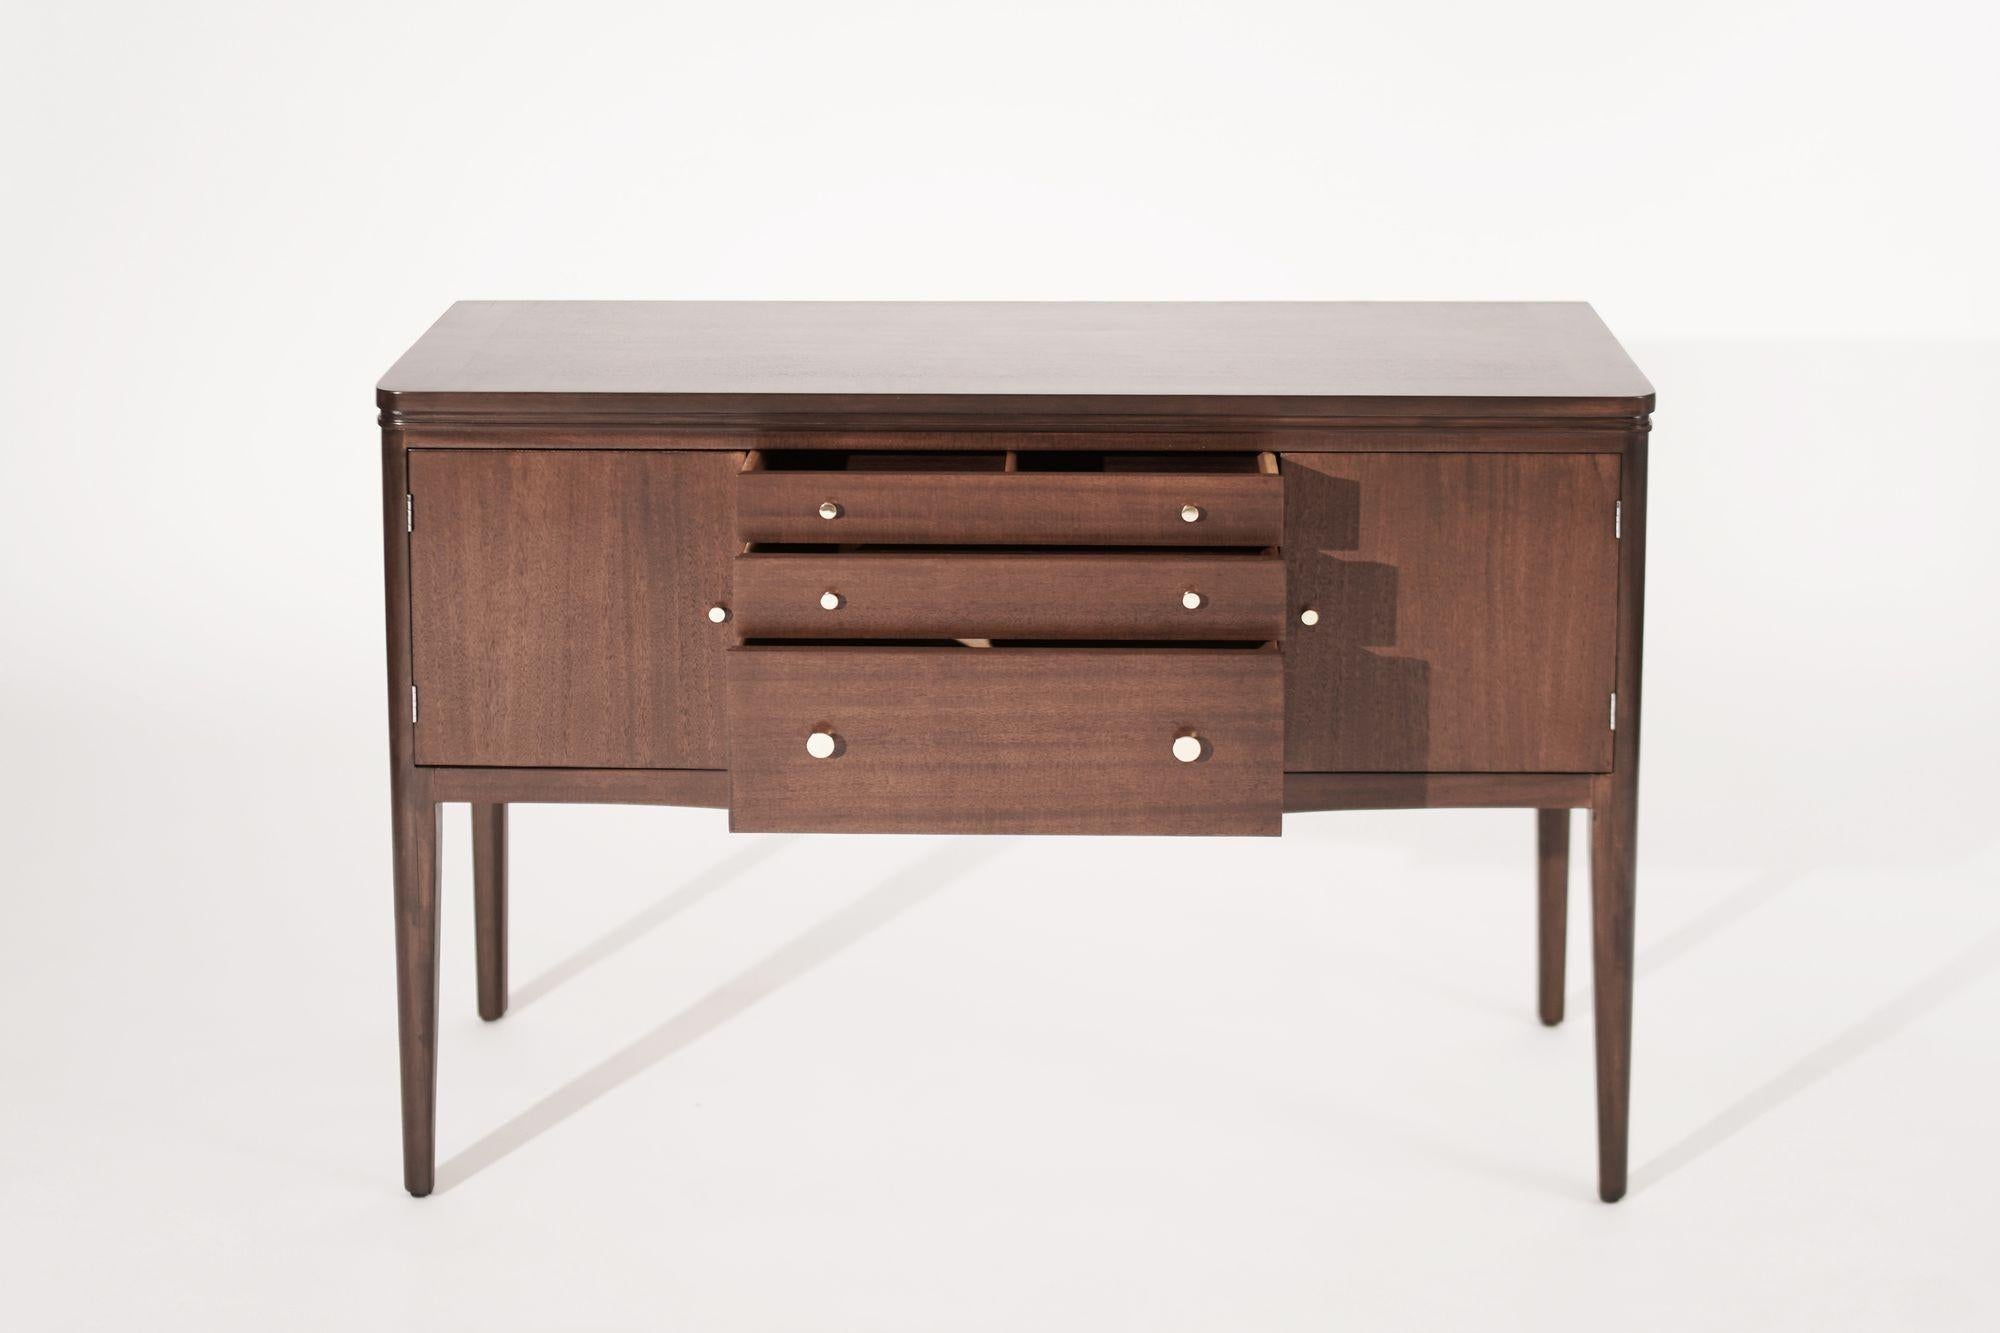 American Mid Century Entry Console Table in Mahogany, C. 1950s For Sale